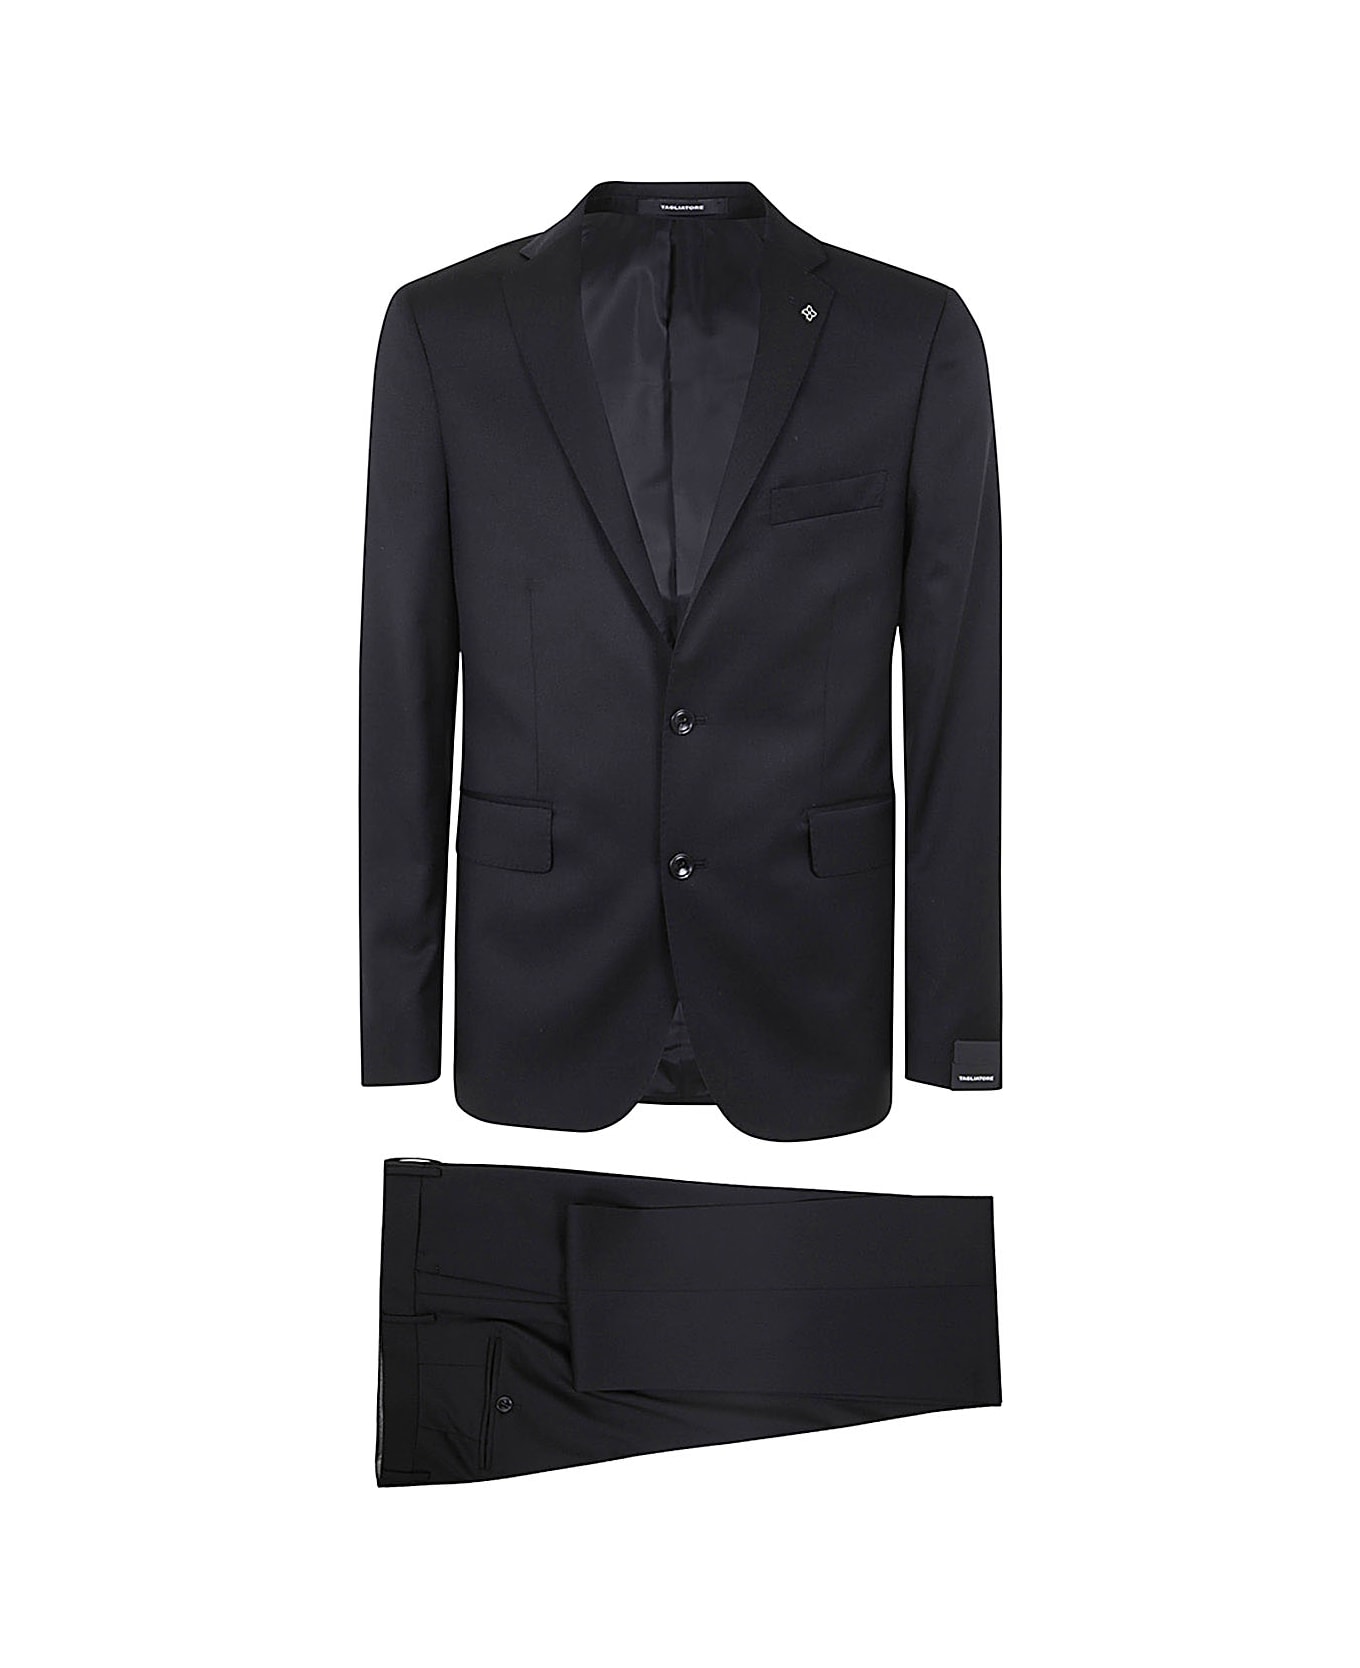 Tagliatore Classic Suit With Constructed Shoulder - Black スーツ